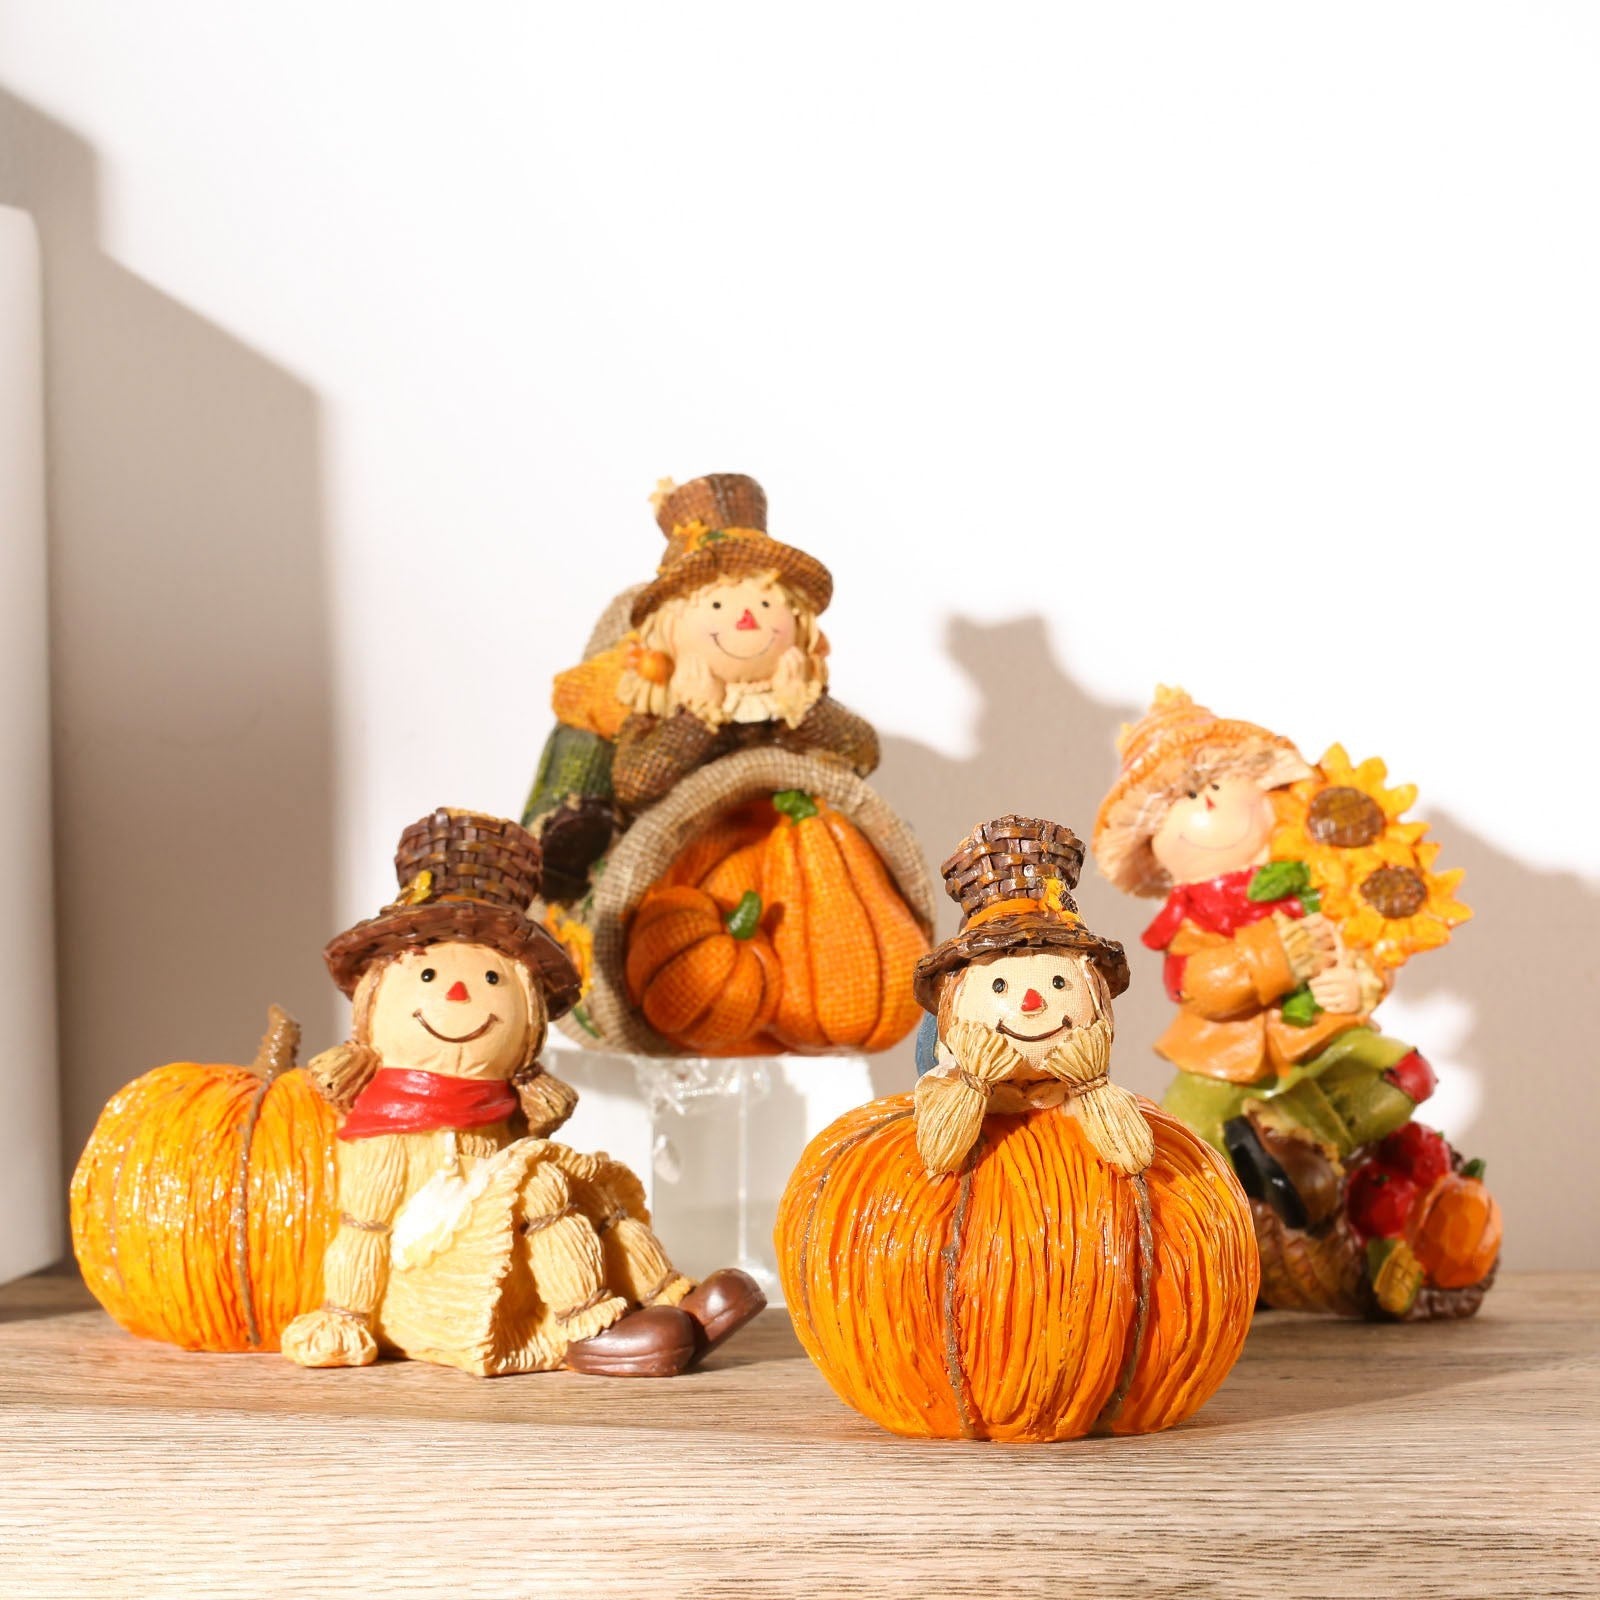 Pumpkin is a perfect little ornament for your christmas or thanksgiving!